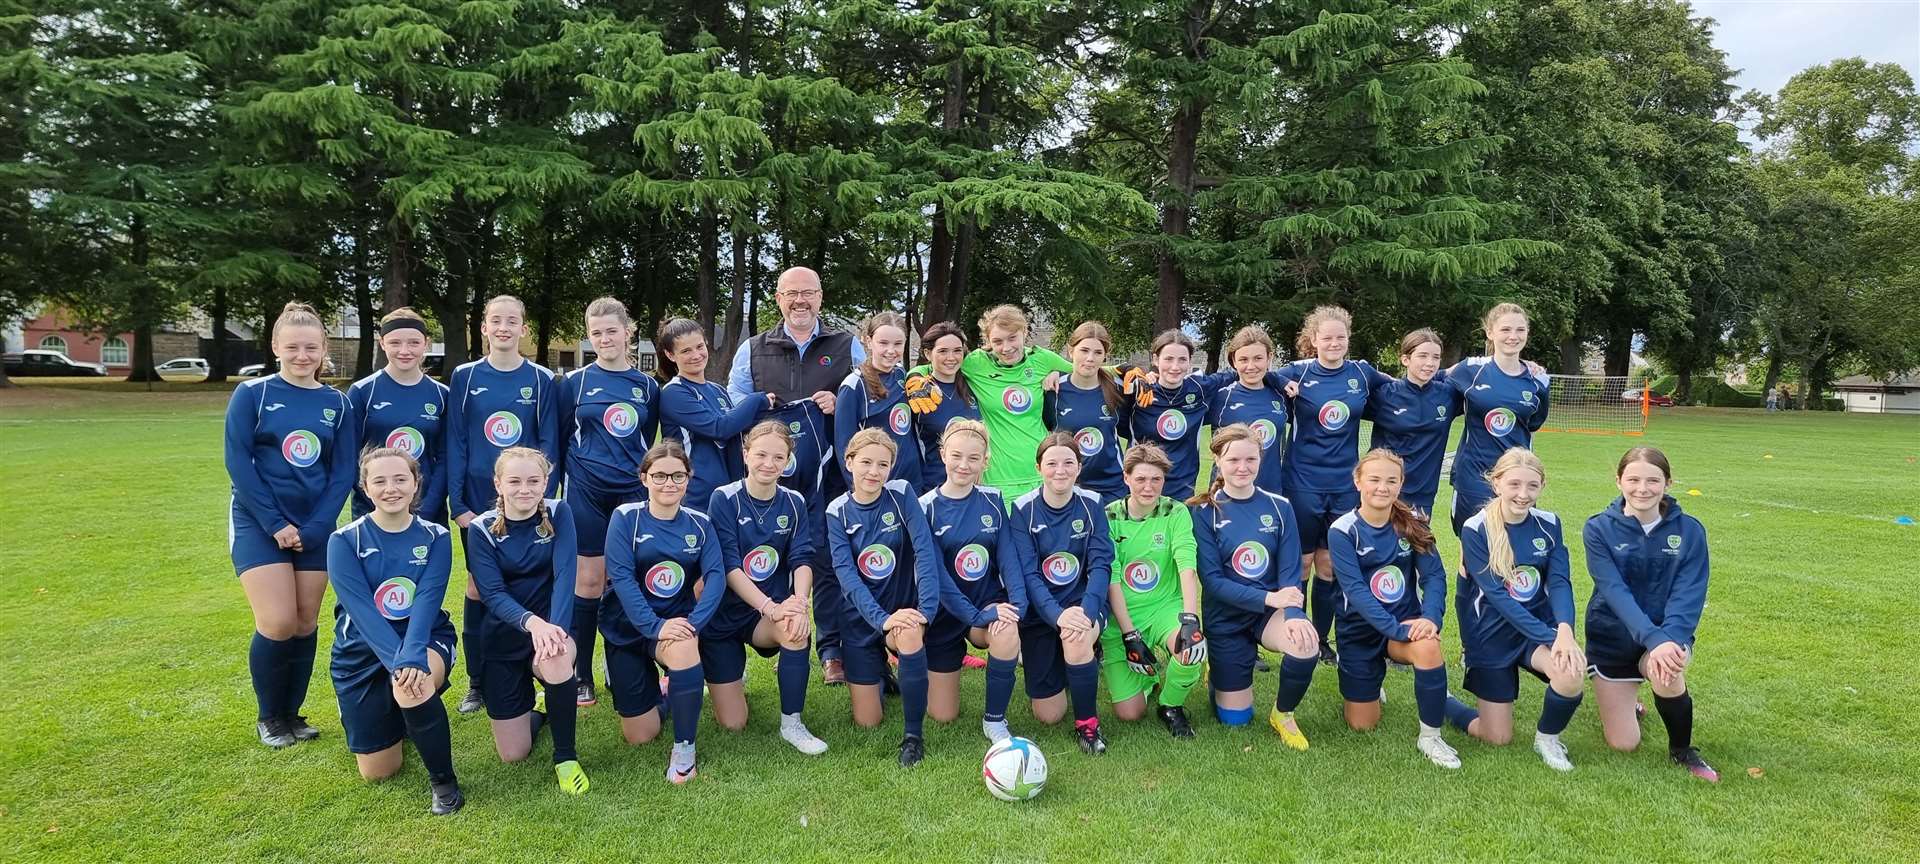 AJE director and general manager Graham Alexander with the girls football team donning their new kit.